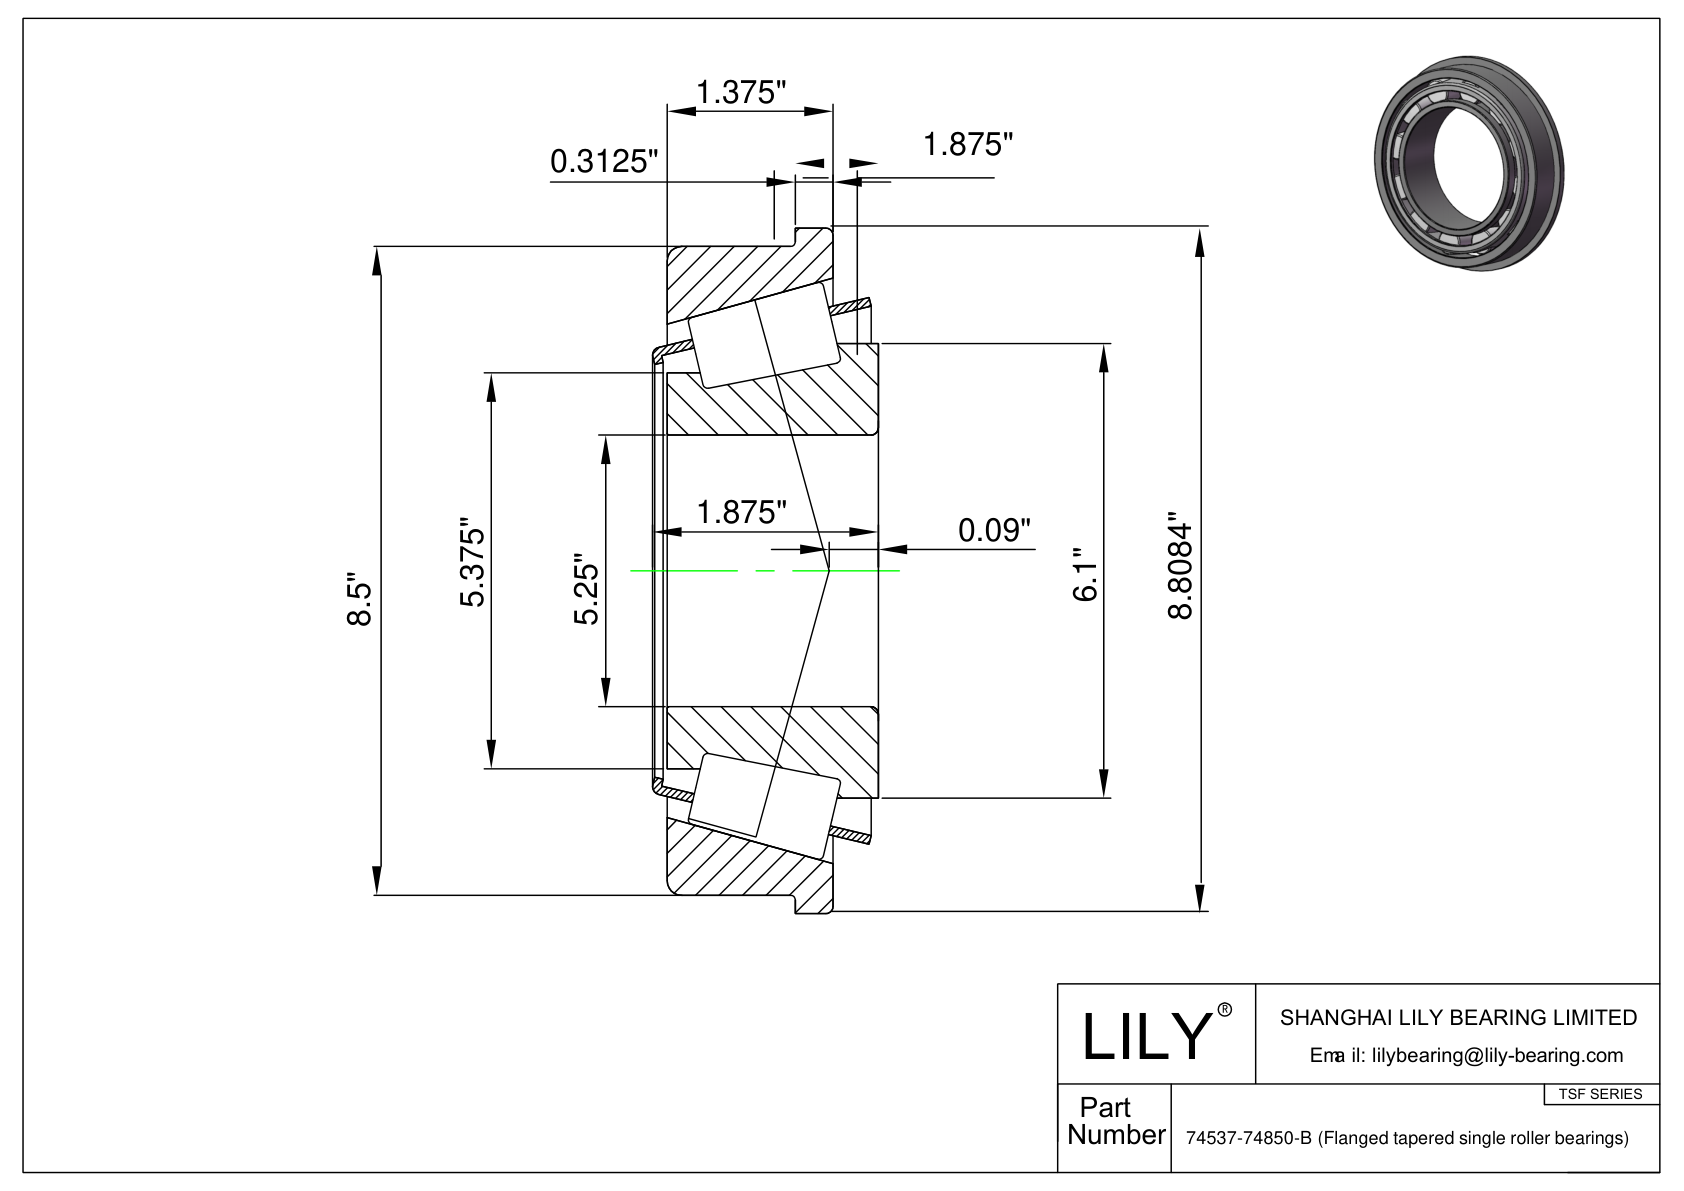 74537-74850-B TSF (Tapered Single Roller Bearings with Flange) (Imperial) cad drawing